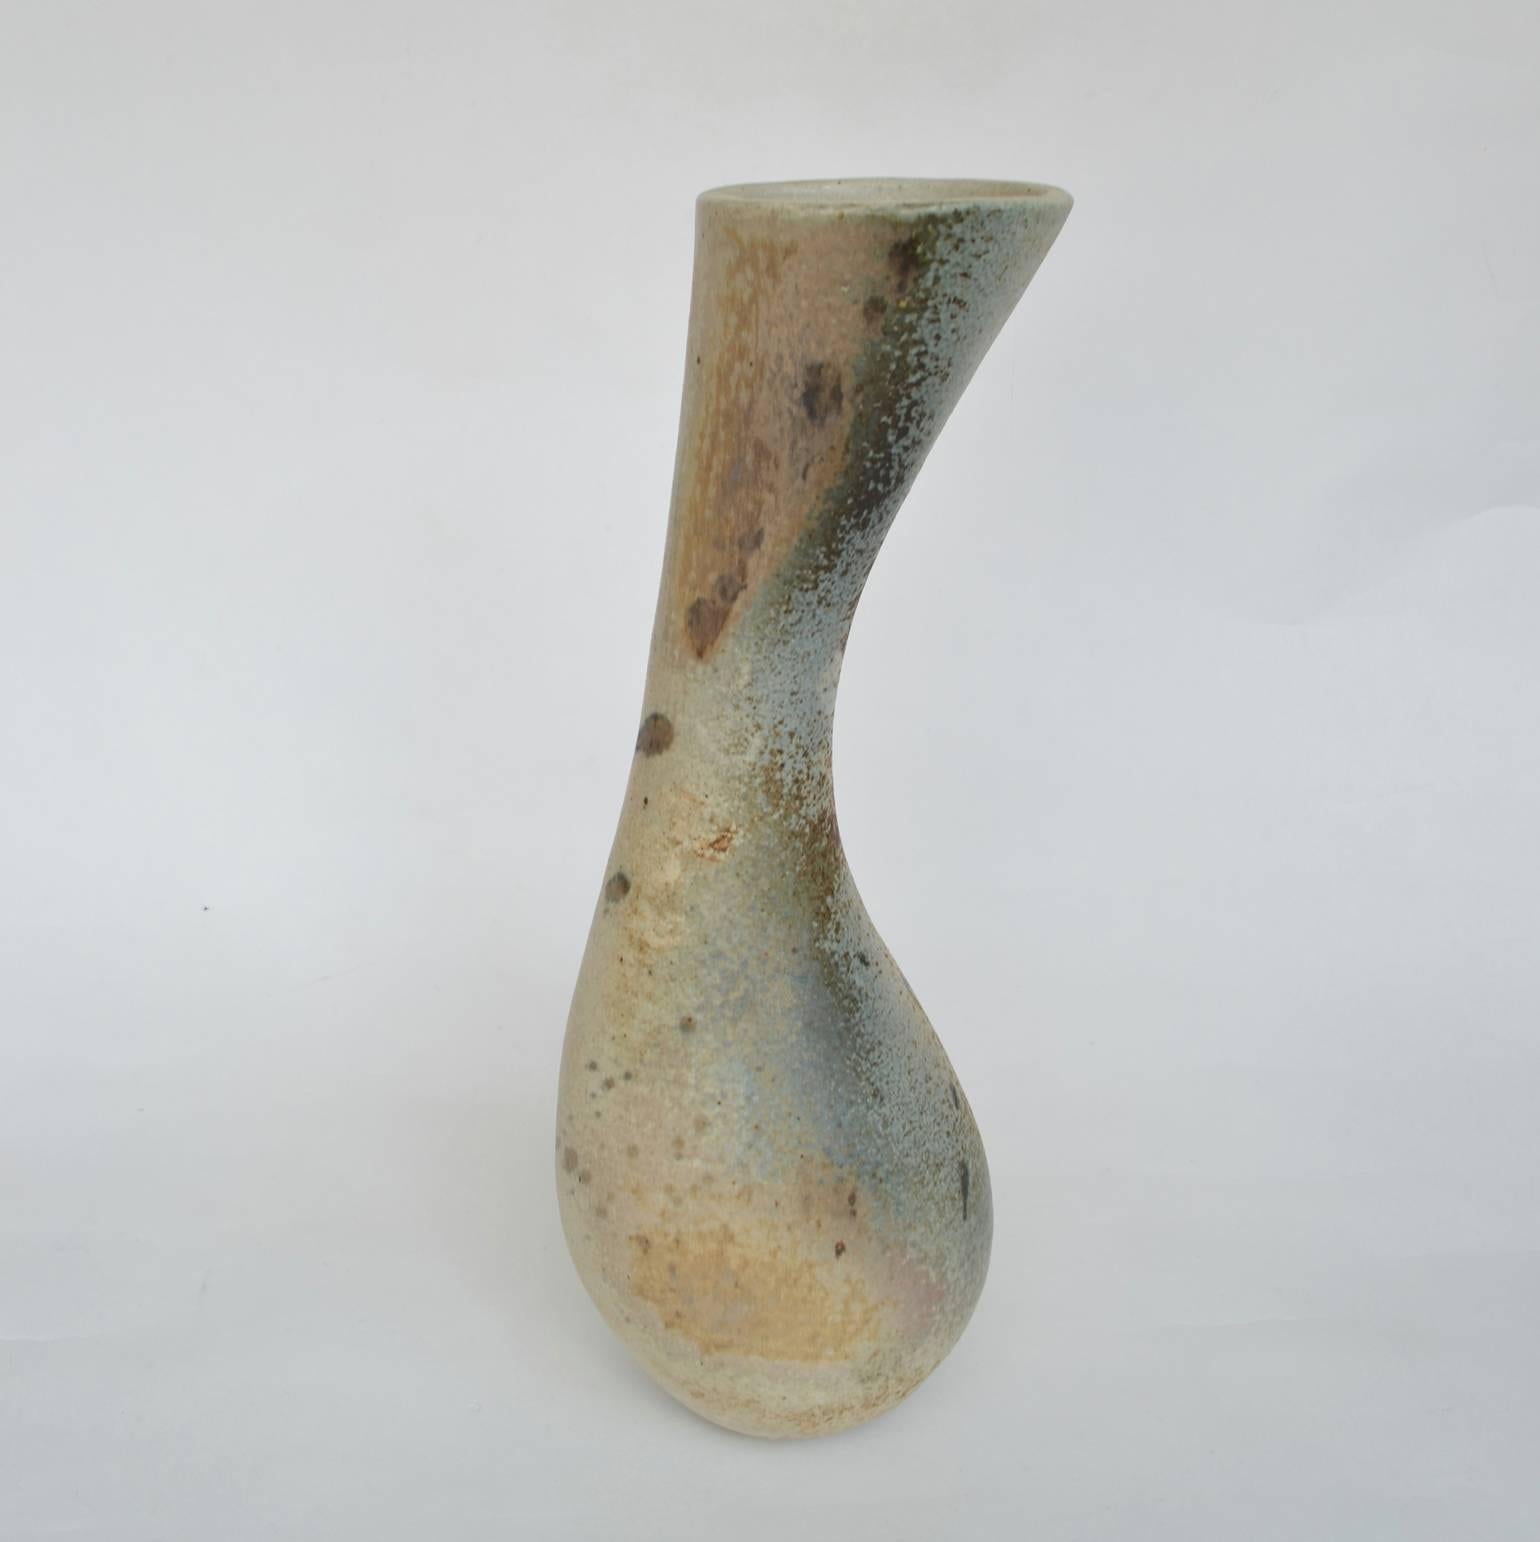 Sculptural Mid Century Modern curvaceous and organic hand formed vase glazed in muted tones of pastel.